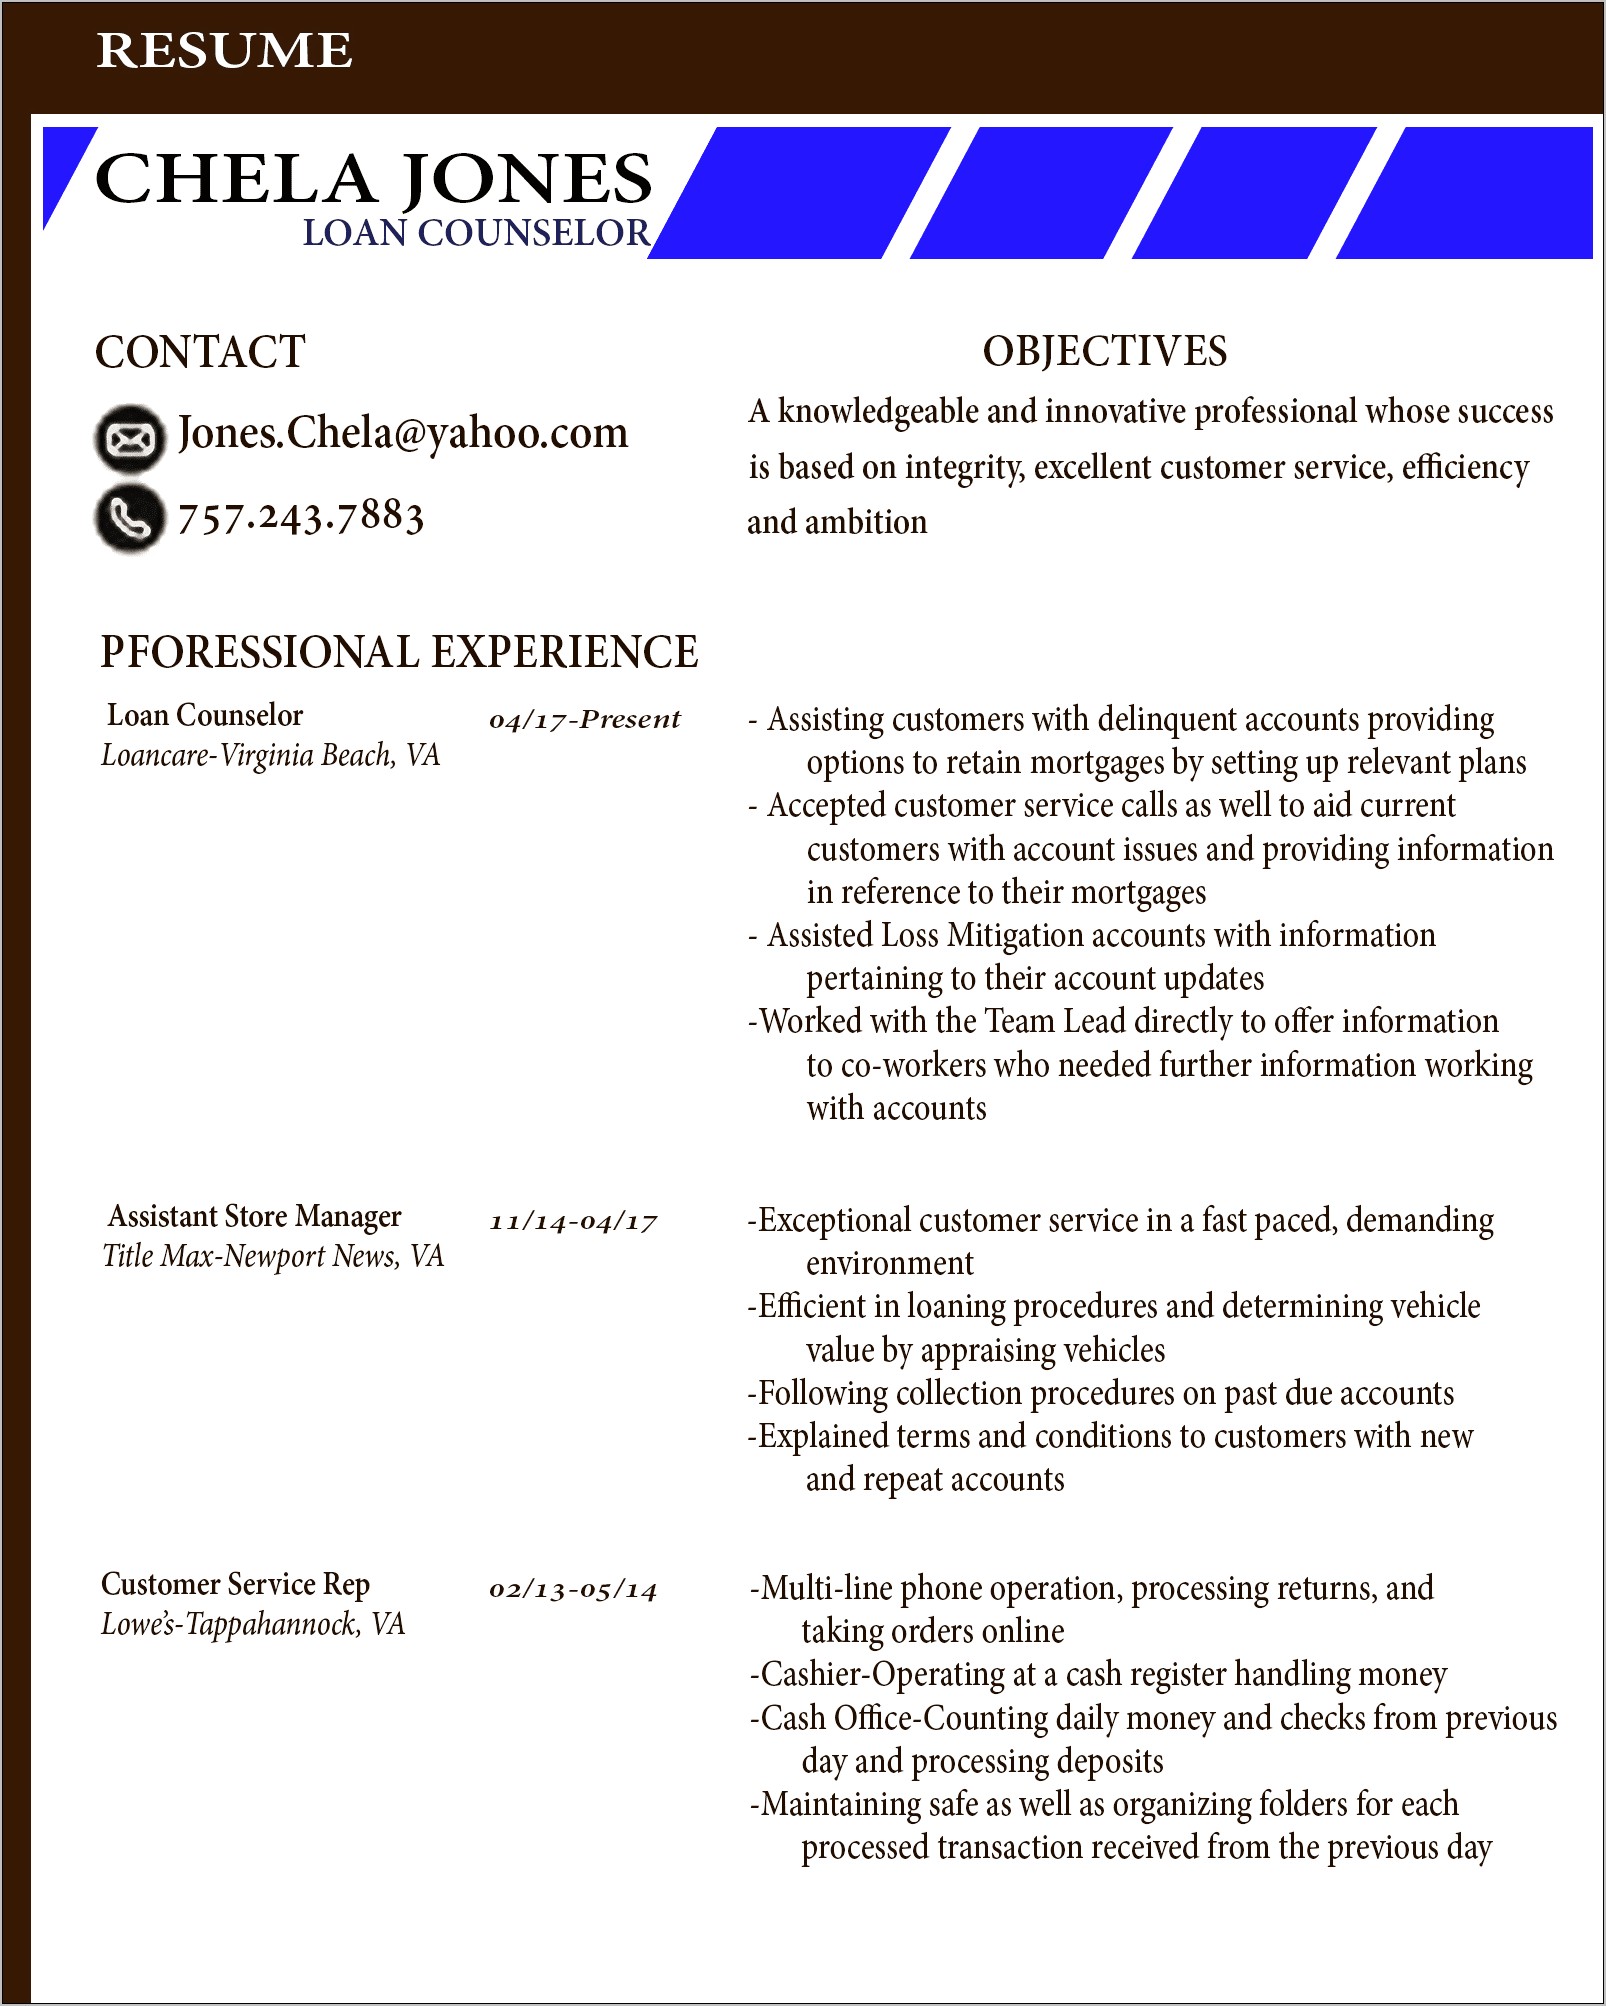 Lowe's Assistant Store Manager Resume